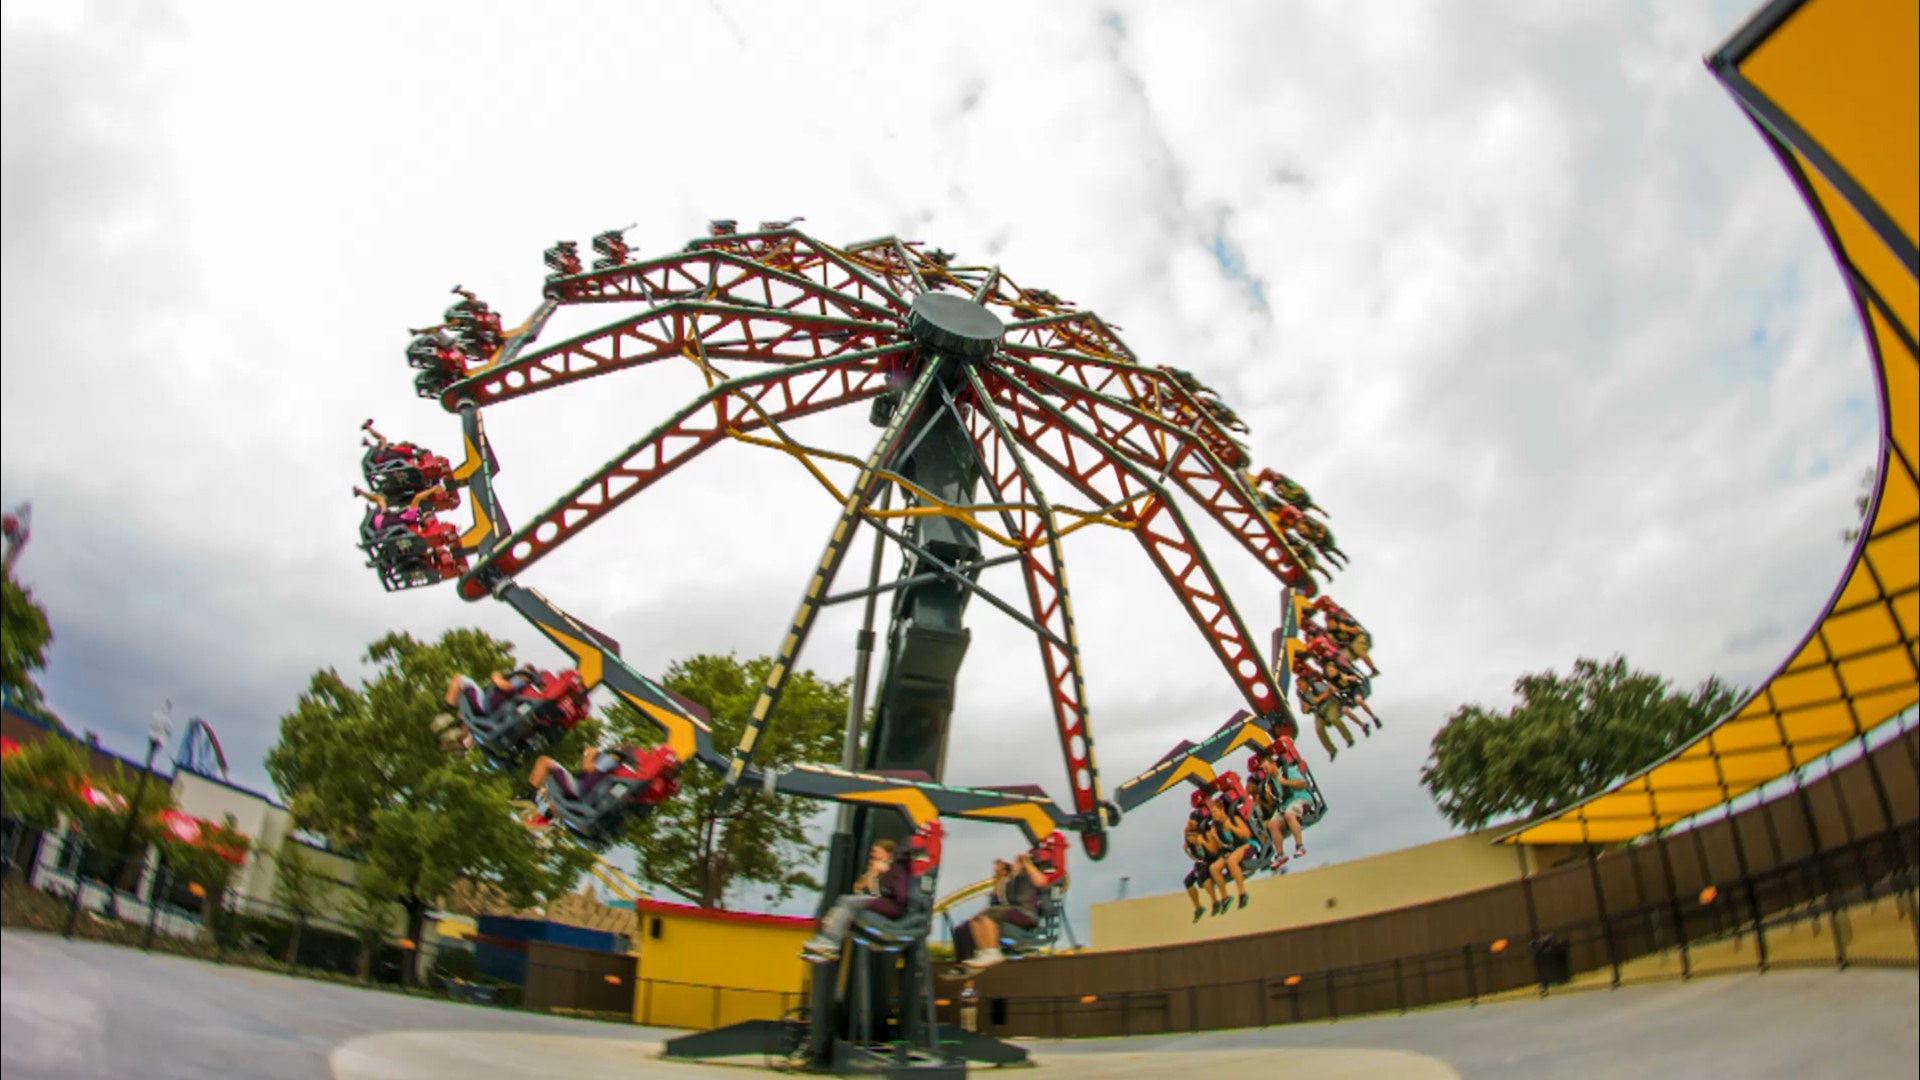 New spinning, tilting ride coming to Six Flags St. Louis